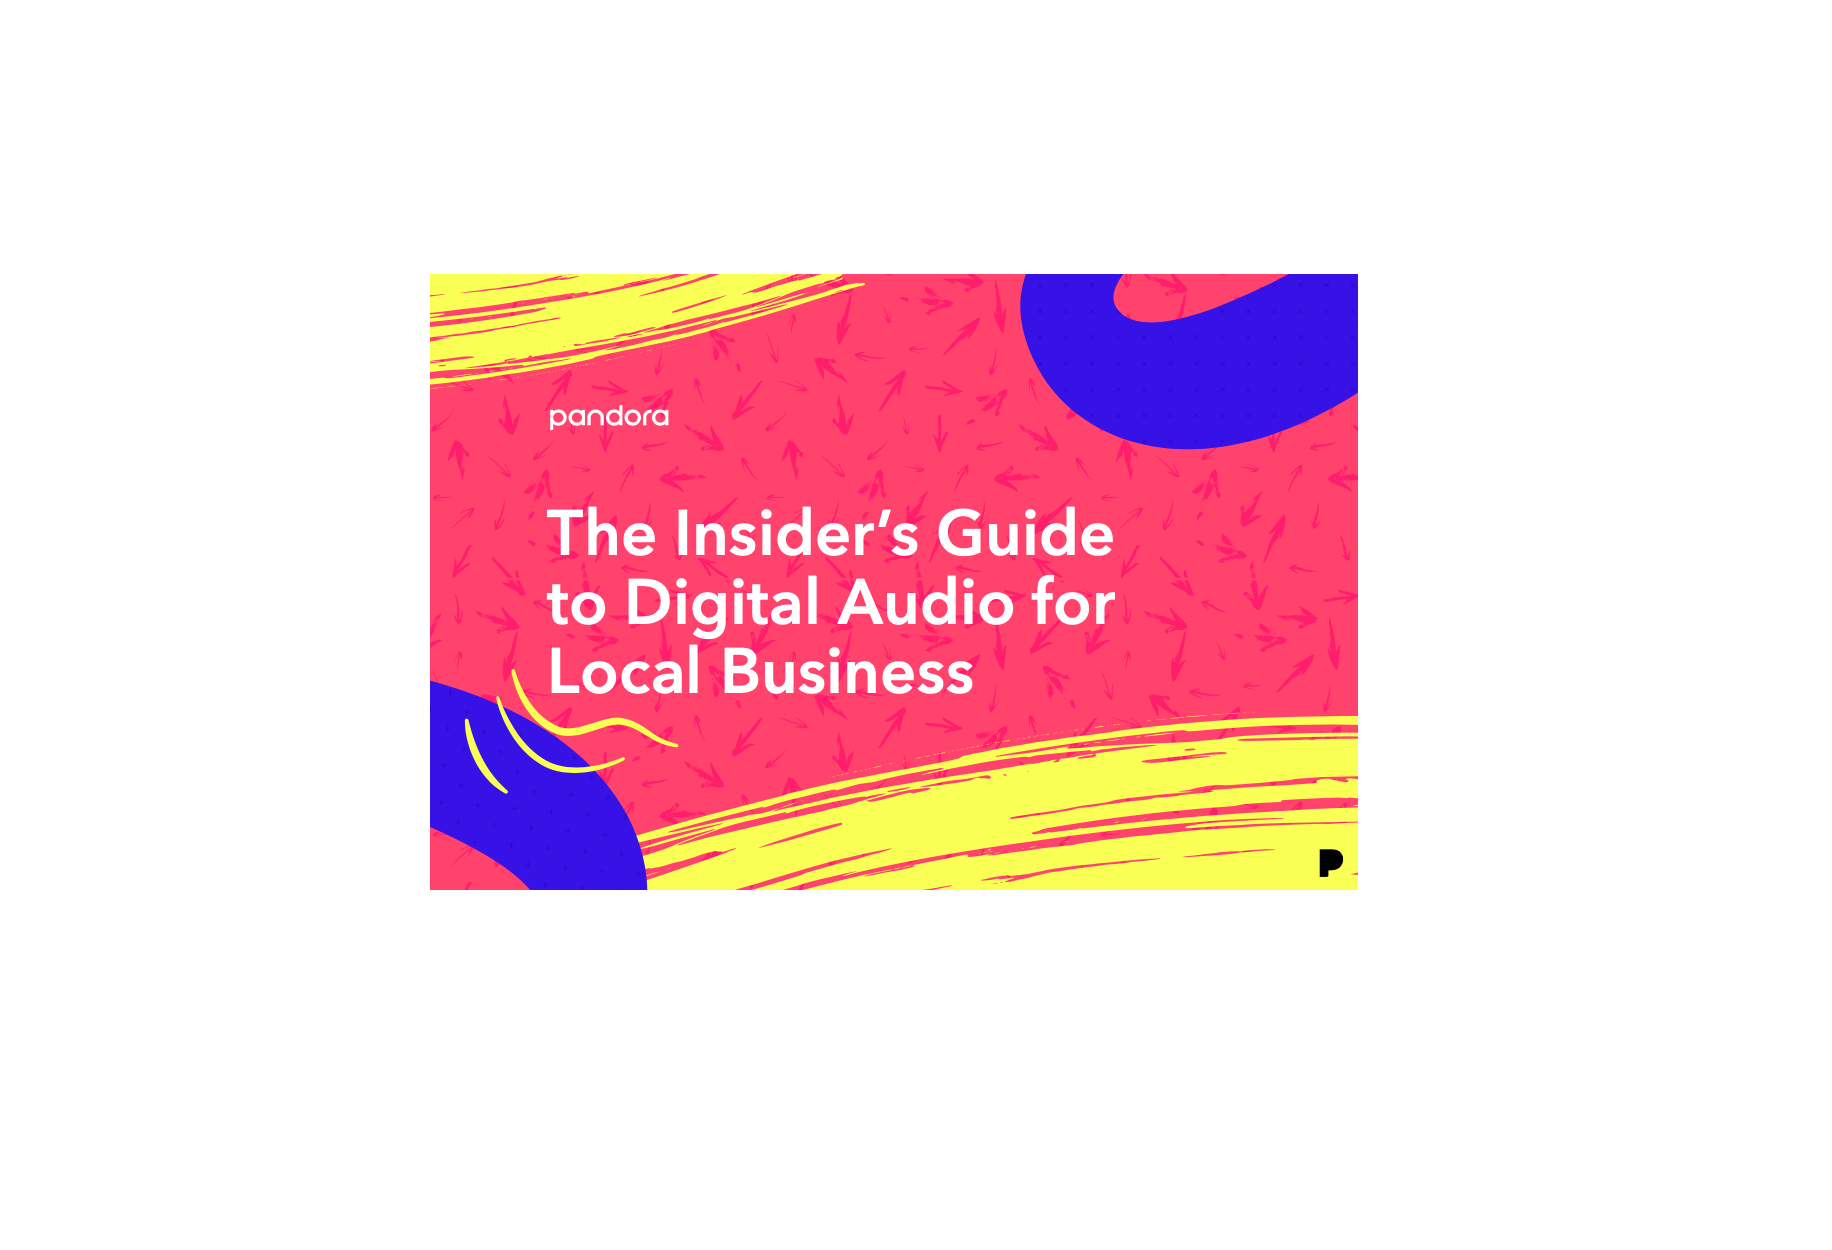 Cover image for  article: Pandora's Insider's Guide to Digital Audio Drives Growth for Local Businesses